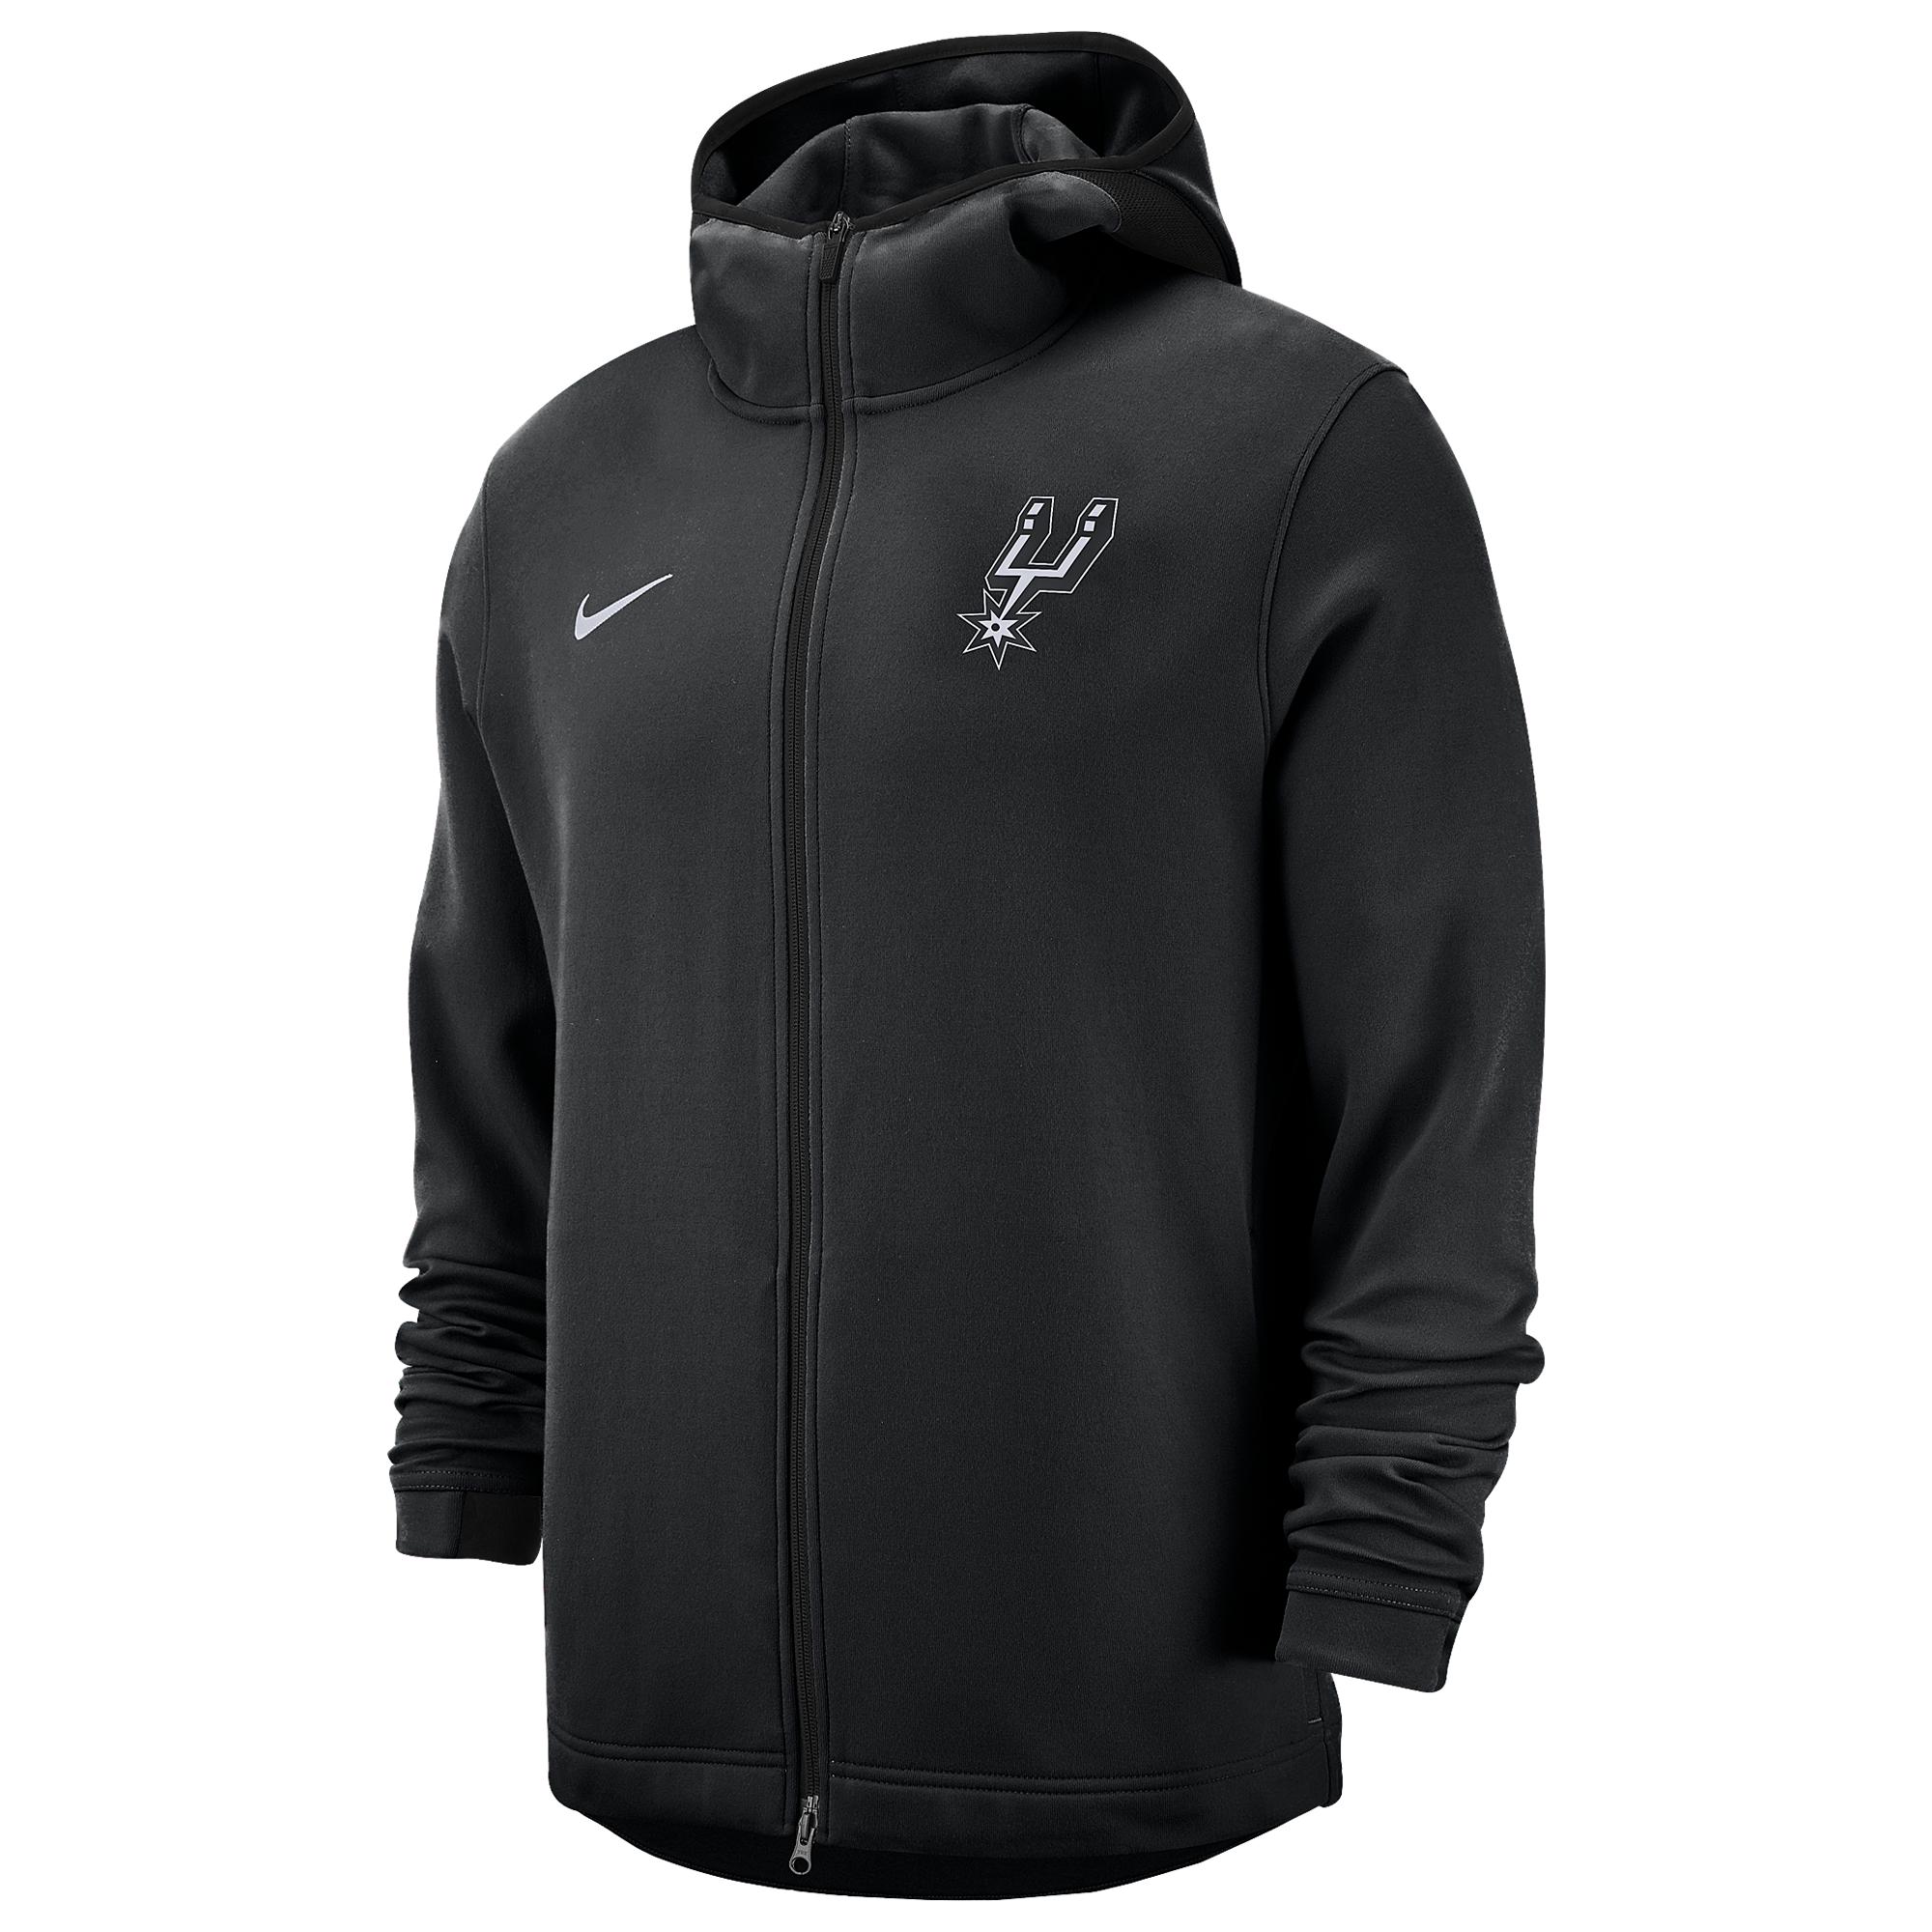 Nike Synthetic Nba Player Showtime Full-zip Hoodie in Black for Men ...